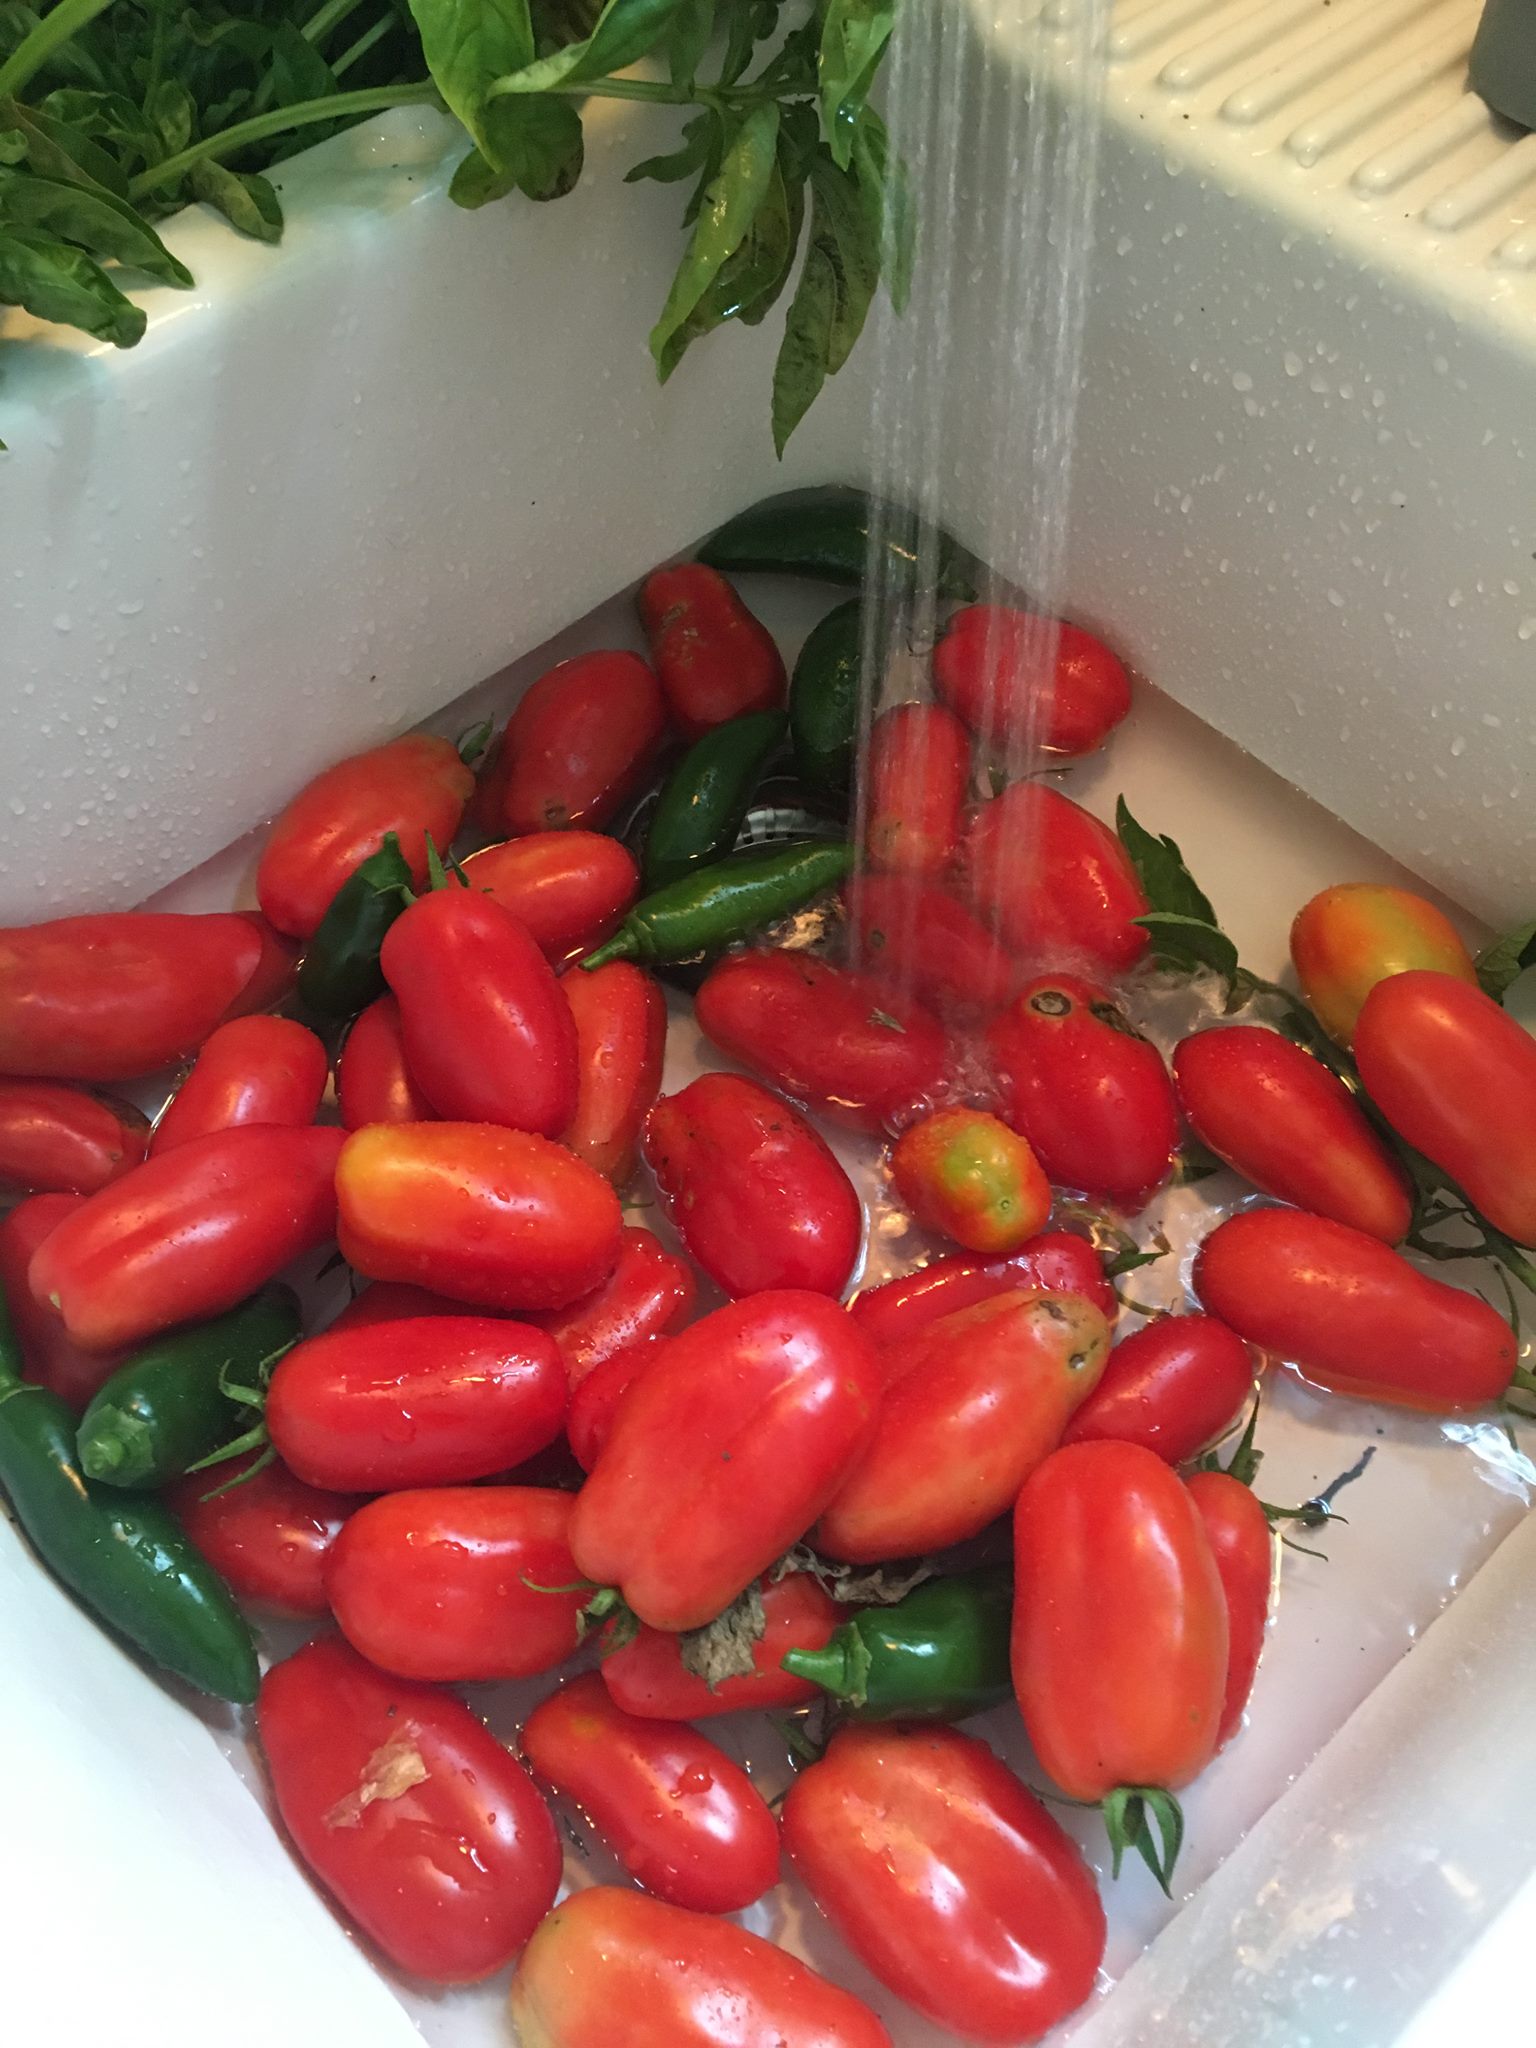 Washing freshly harvested paste tomatoes and jalapenos from the FODMAP Everyday garden.